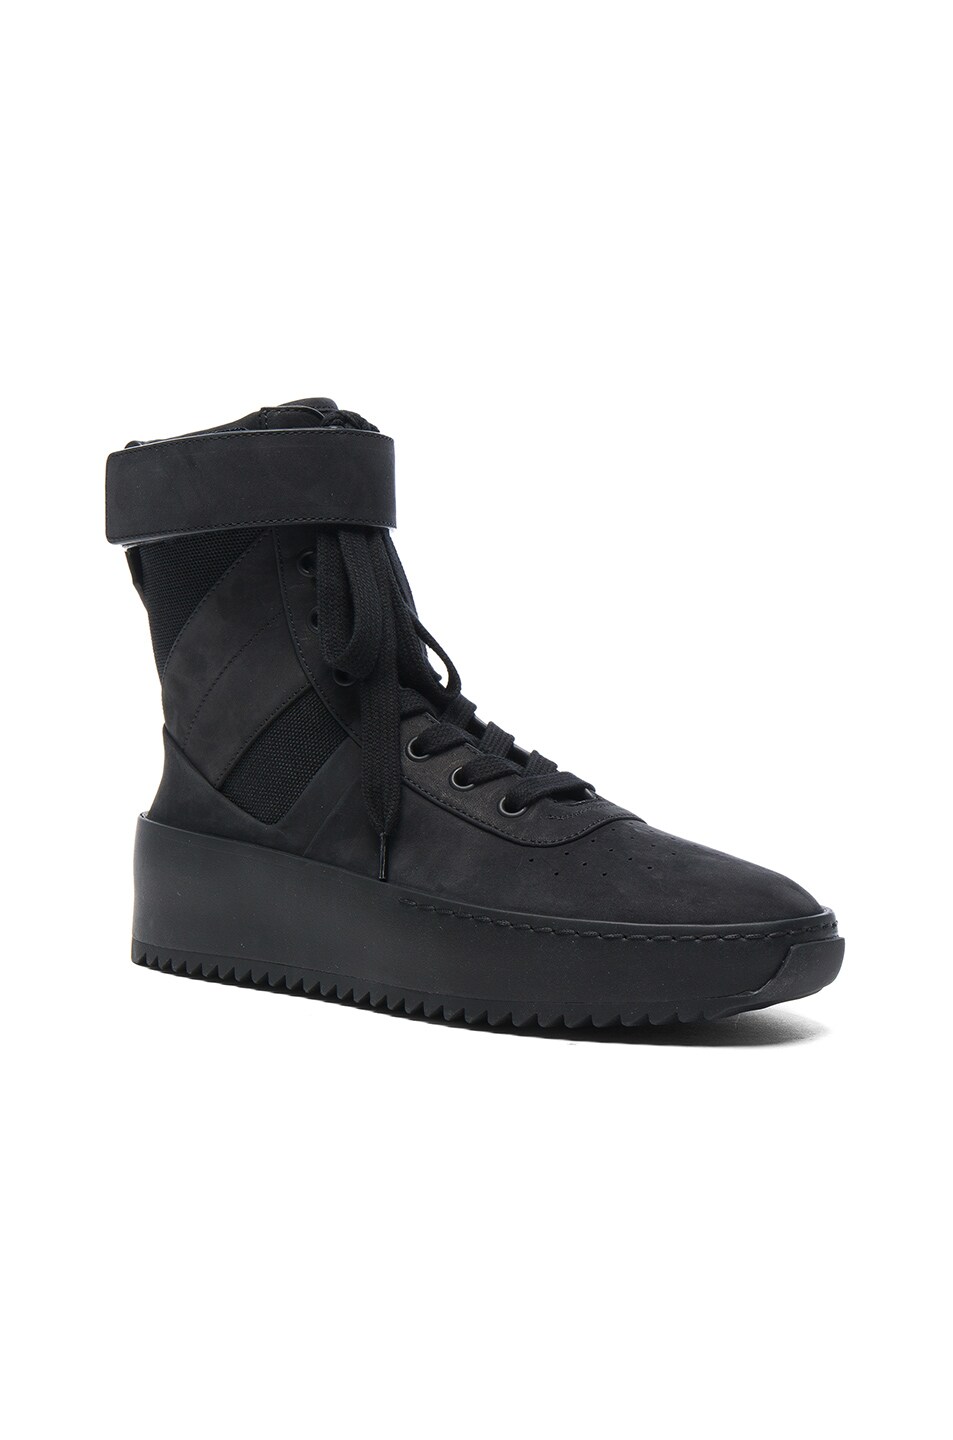 Image 1 of Fear of God Nubuck Leather Military Sneakers in Black